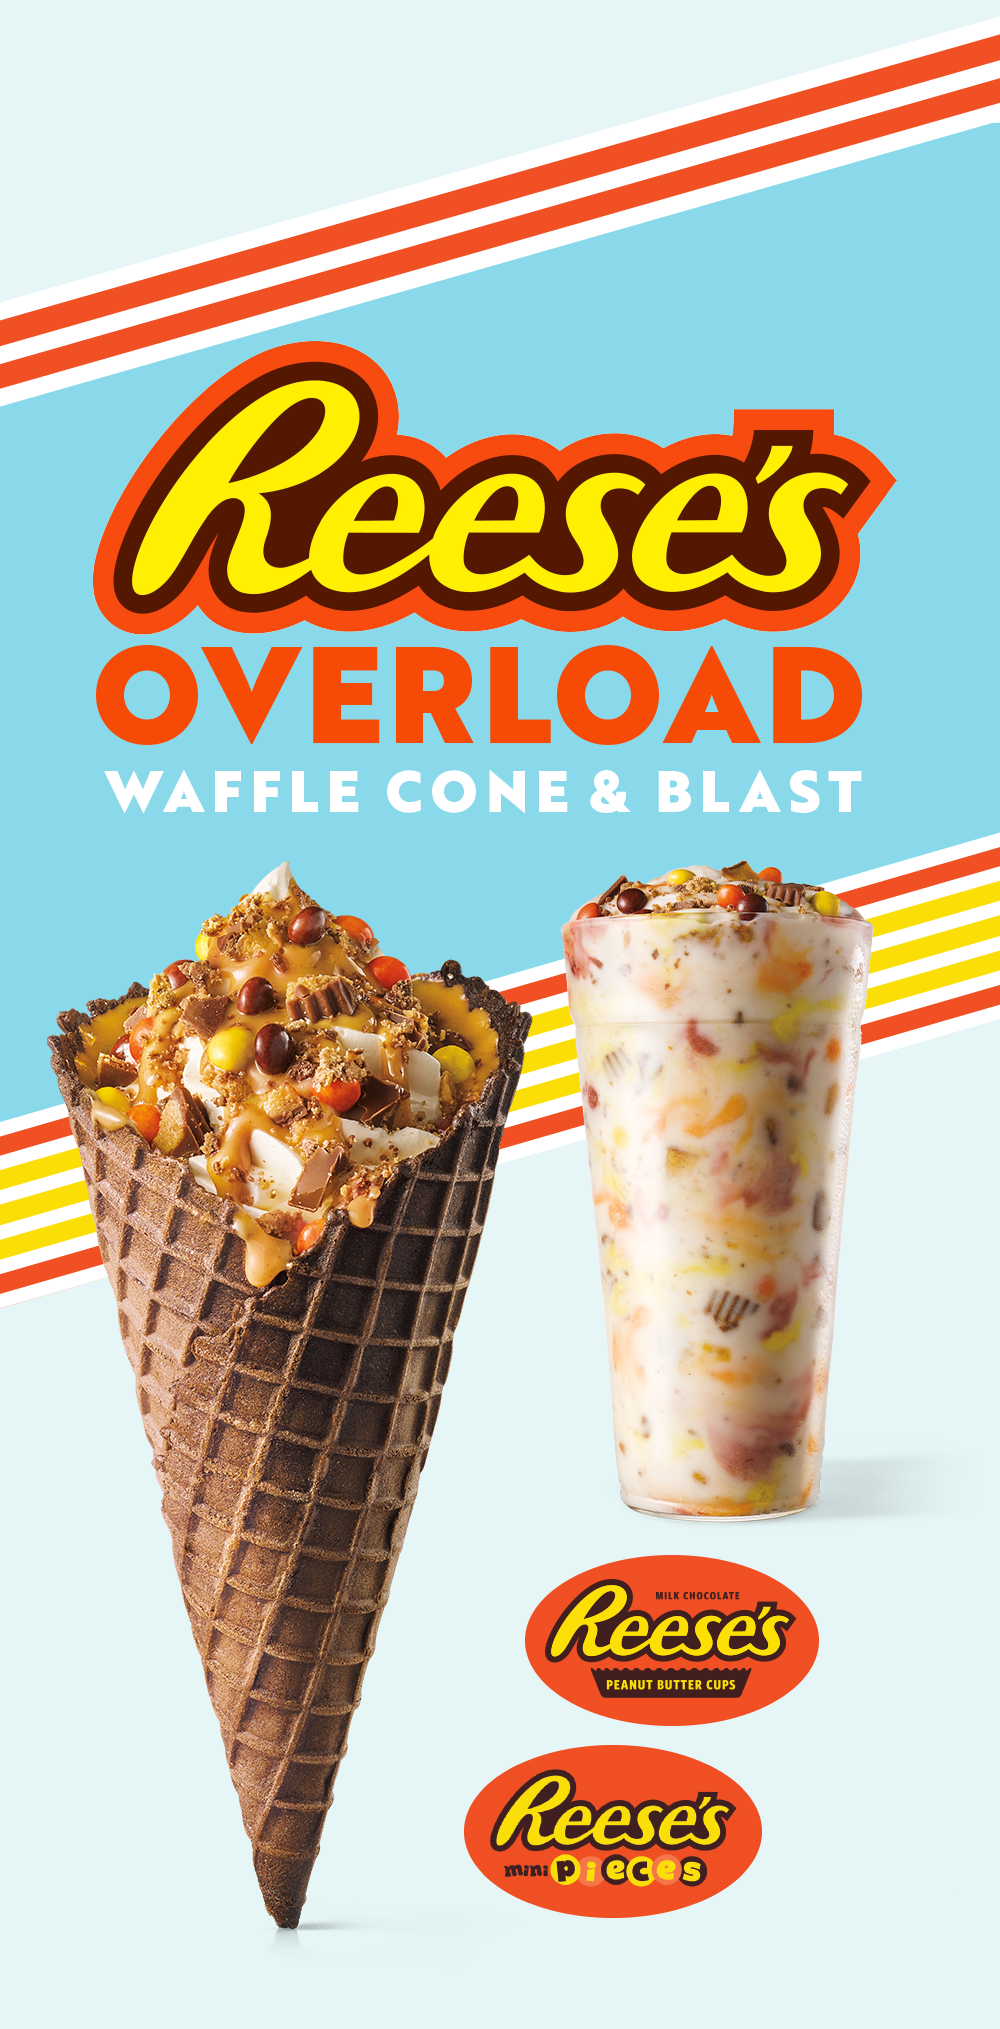 Reese's Overload Waffle Cone and Blast